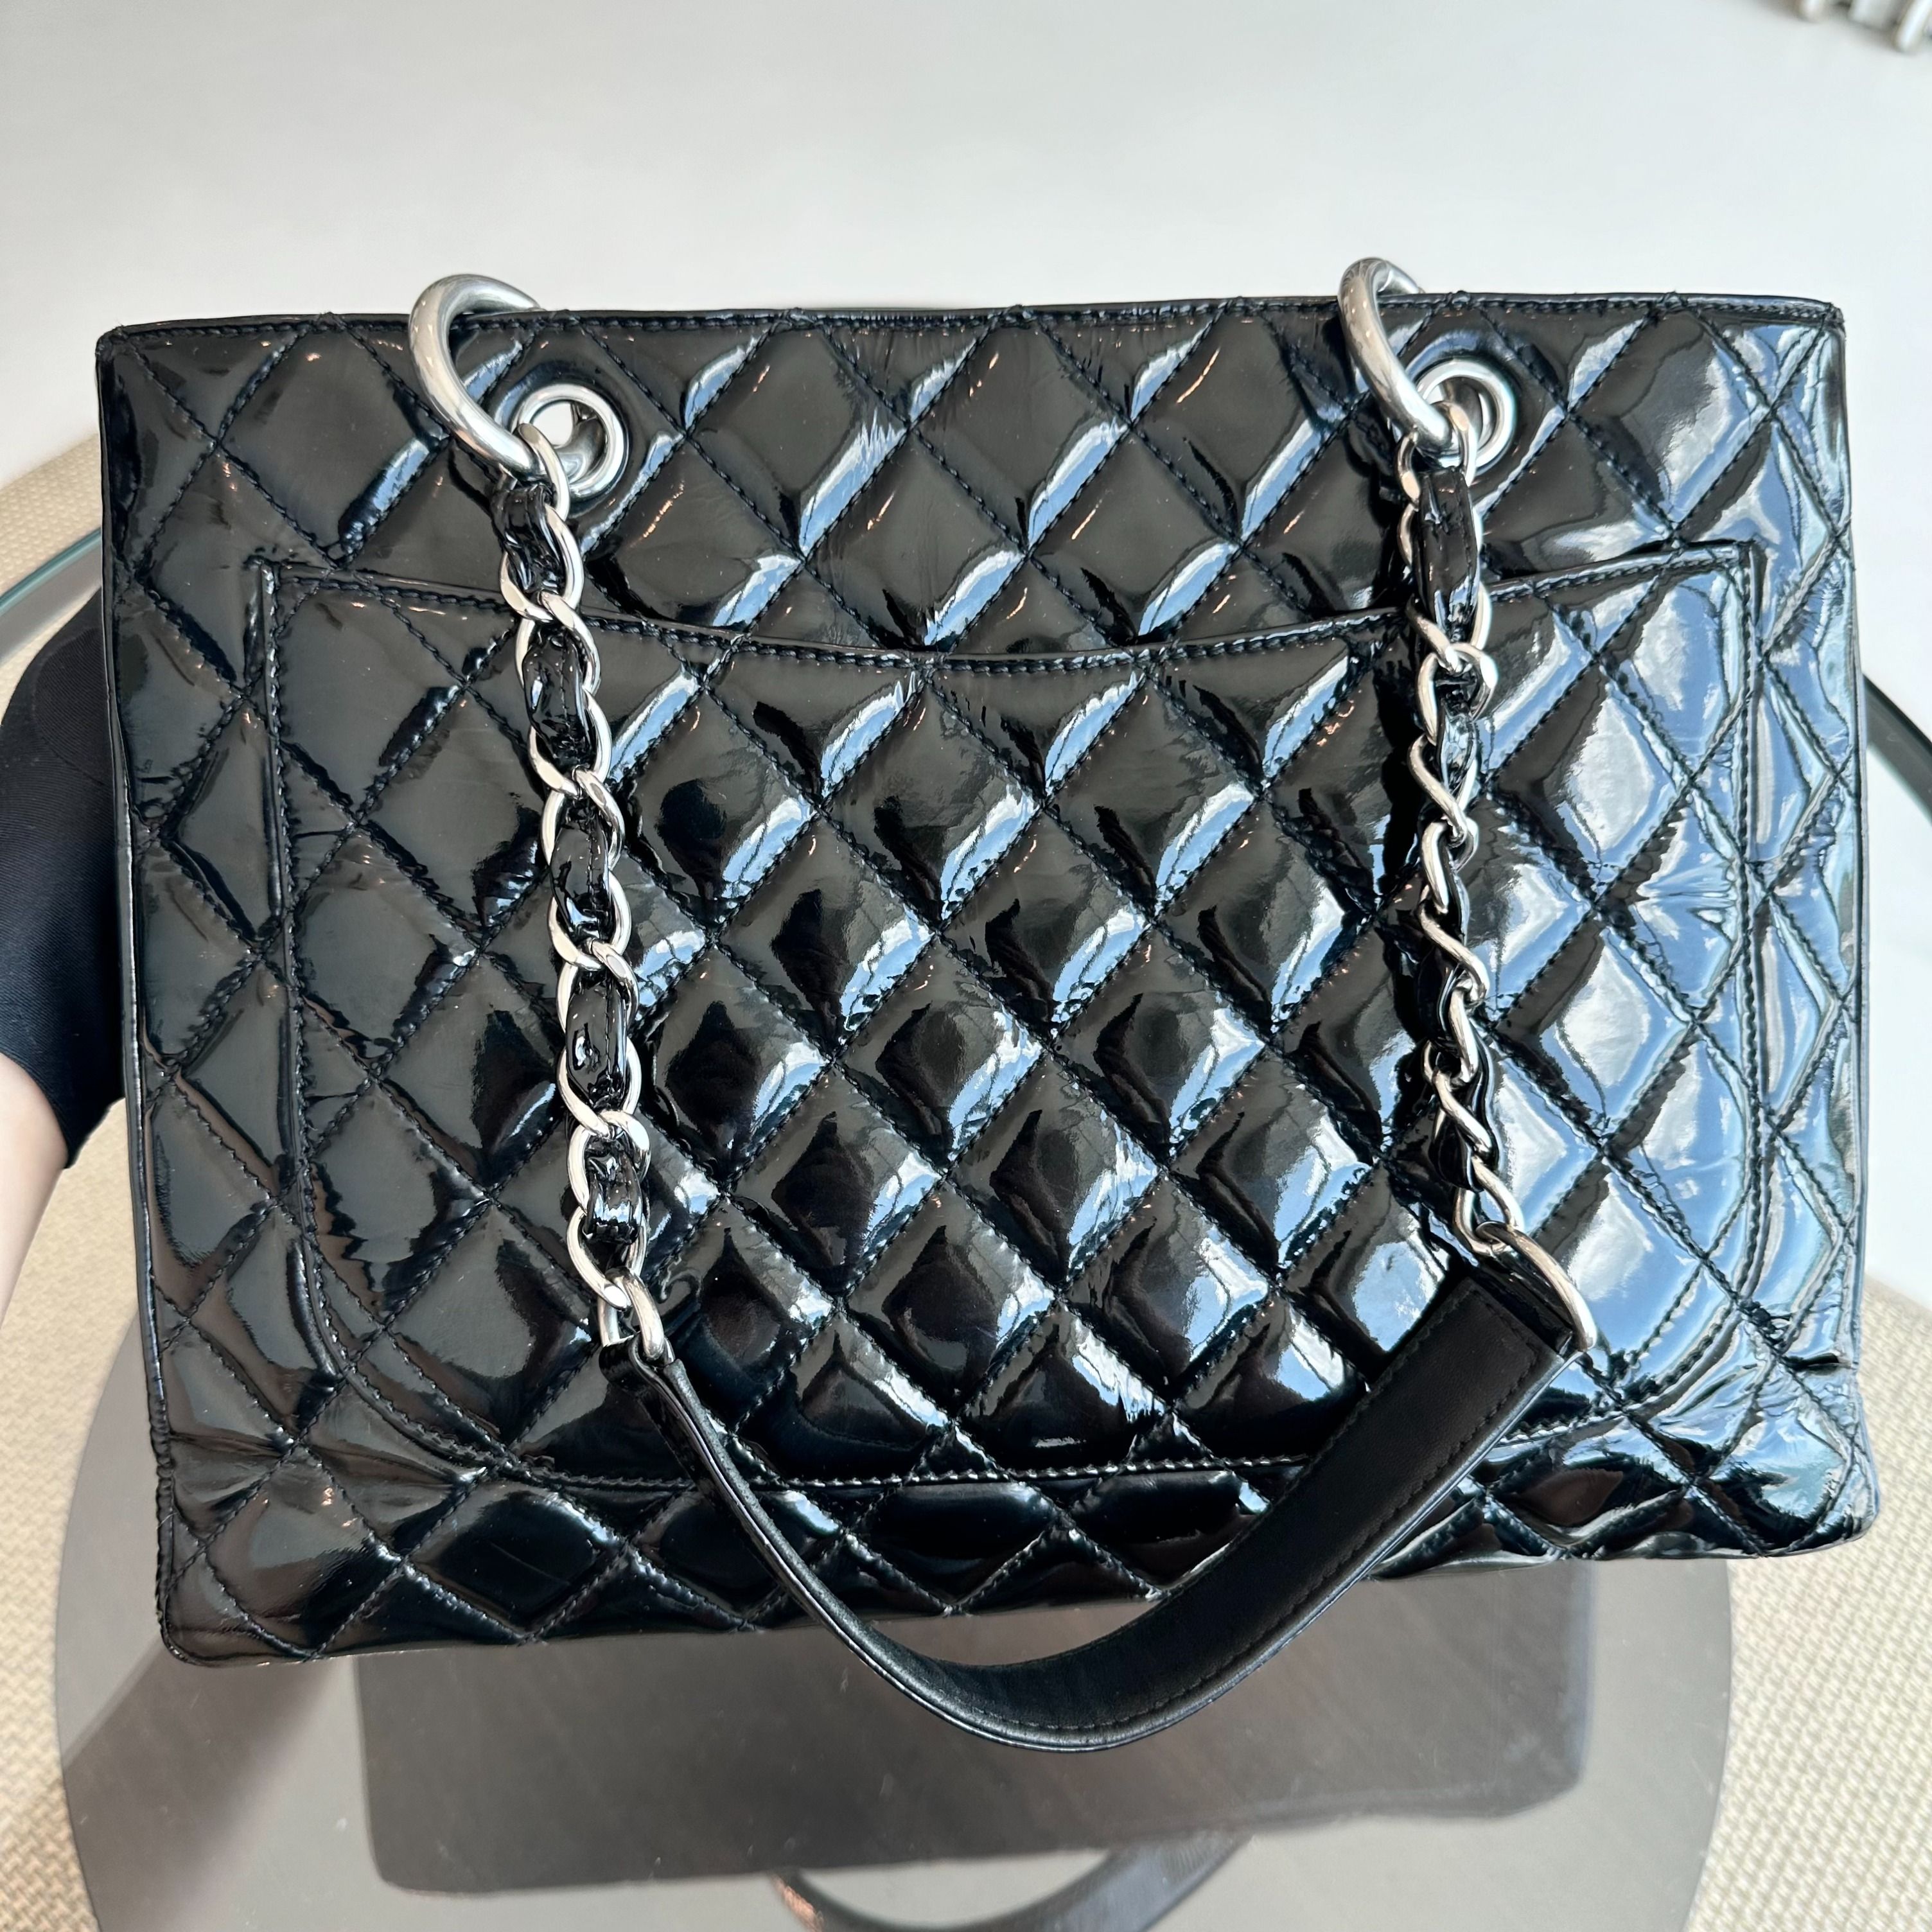 Chanel GST Grand Shopping Tote Patent Leather Quilted Black SHW No 12